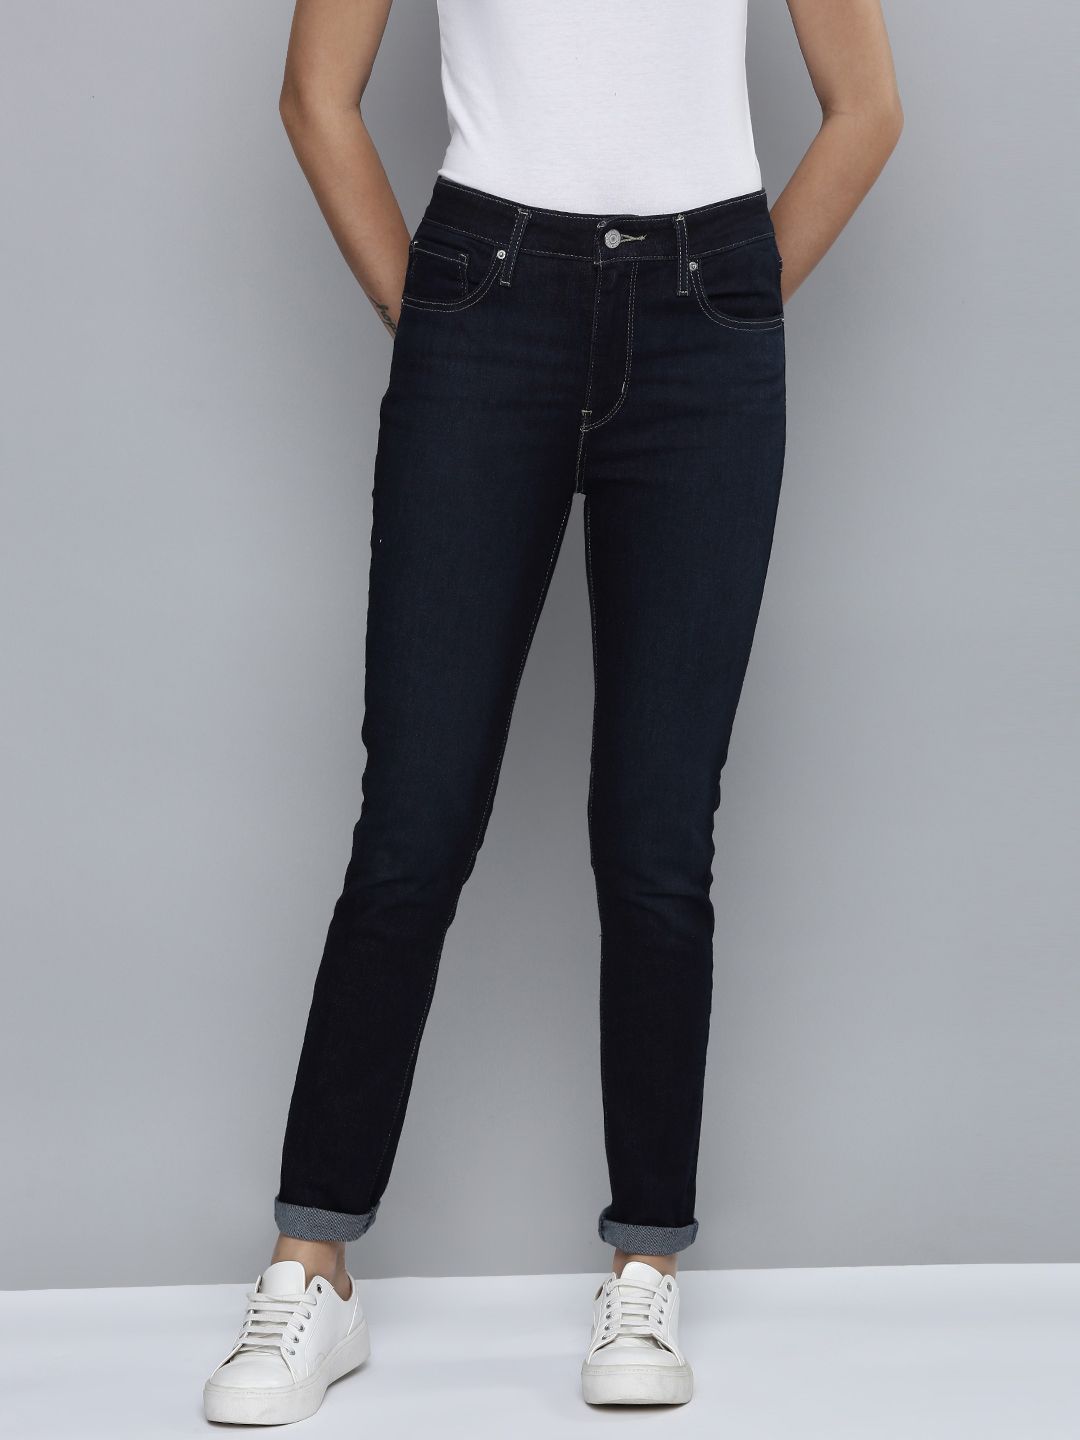 Levis Women Dark Indigo Skinny Fit Stretchable Casual Jeans Price in India